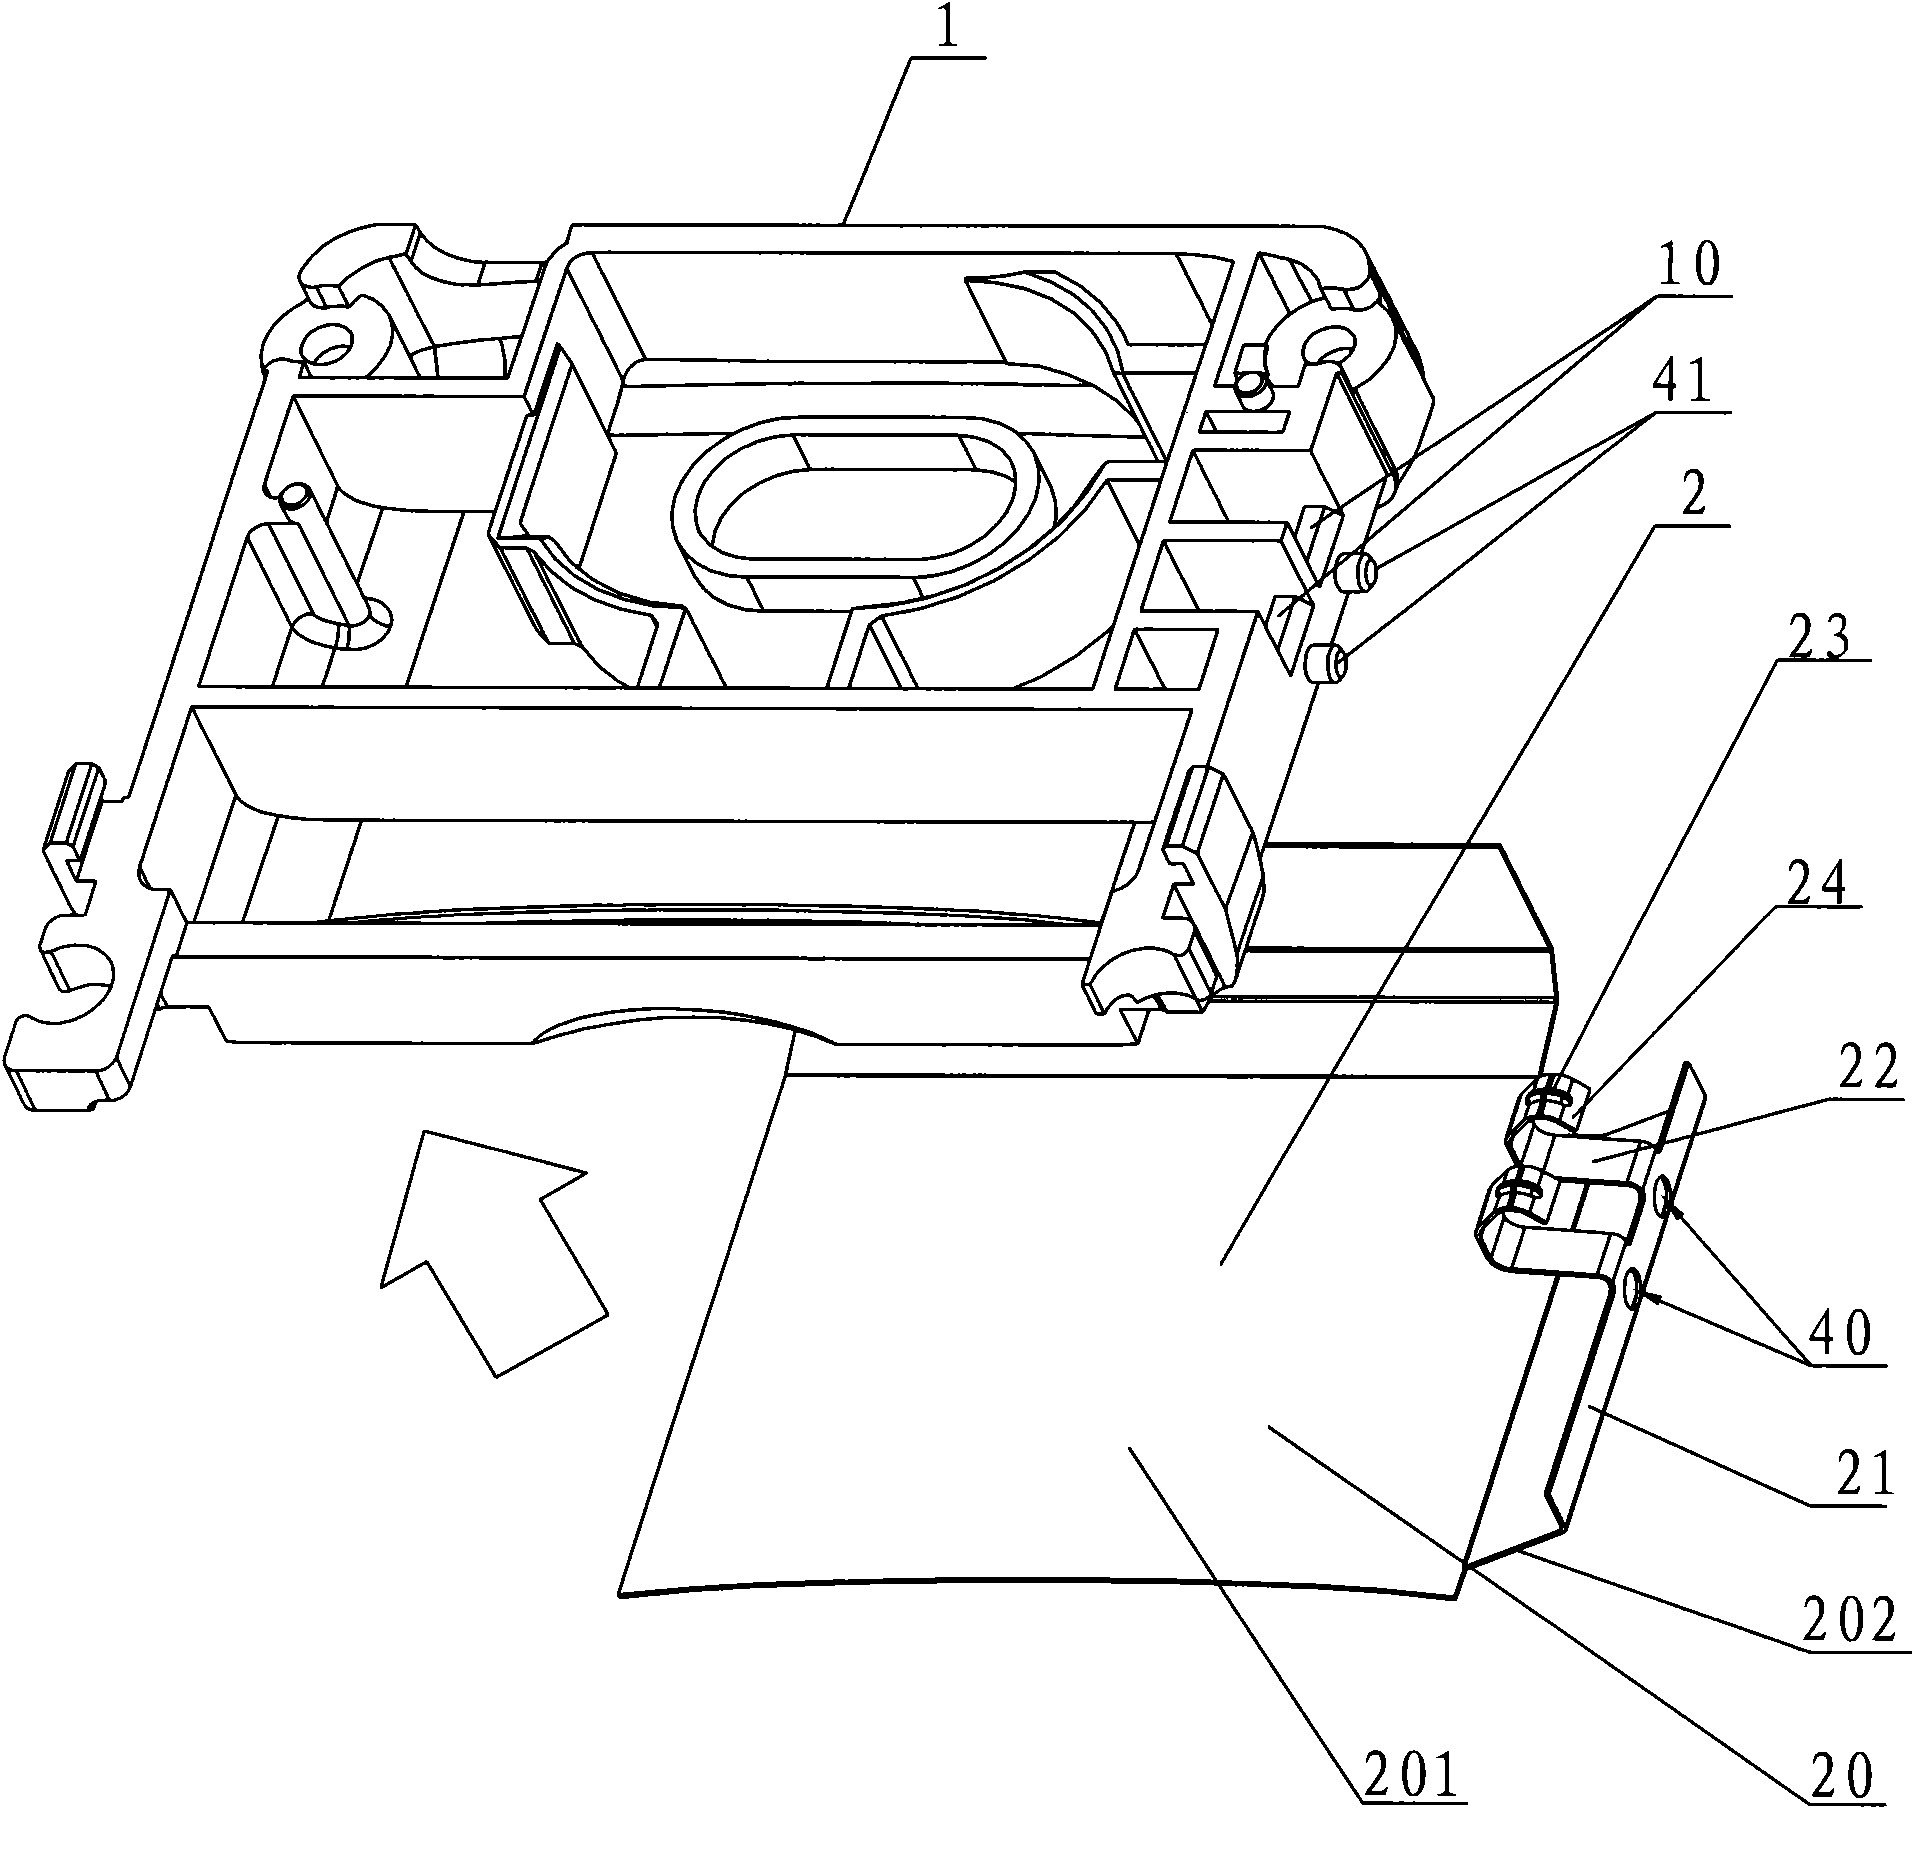 Antenna shrapnel fixing mechanism and electronic device